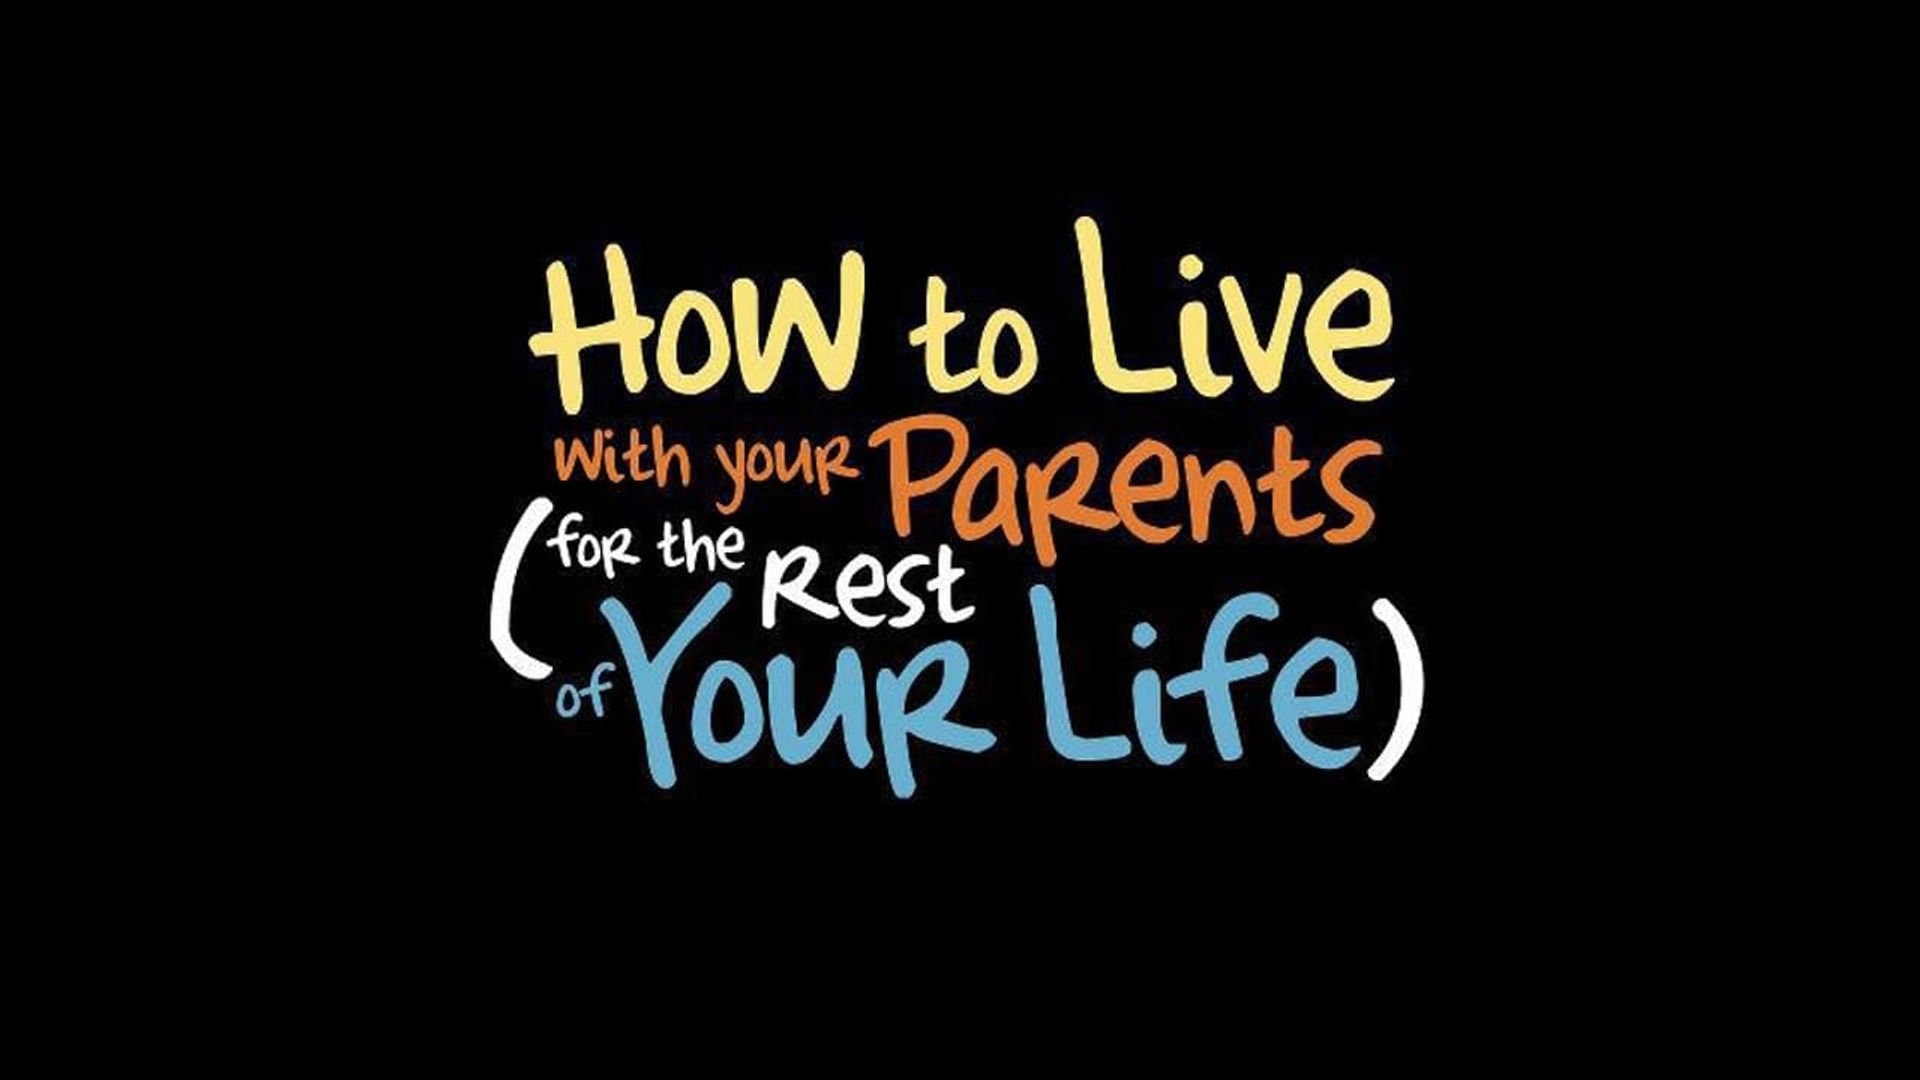 How to Live with Your Parents (for the Rest of Your Life) background